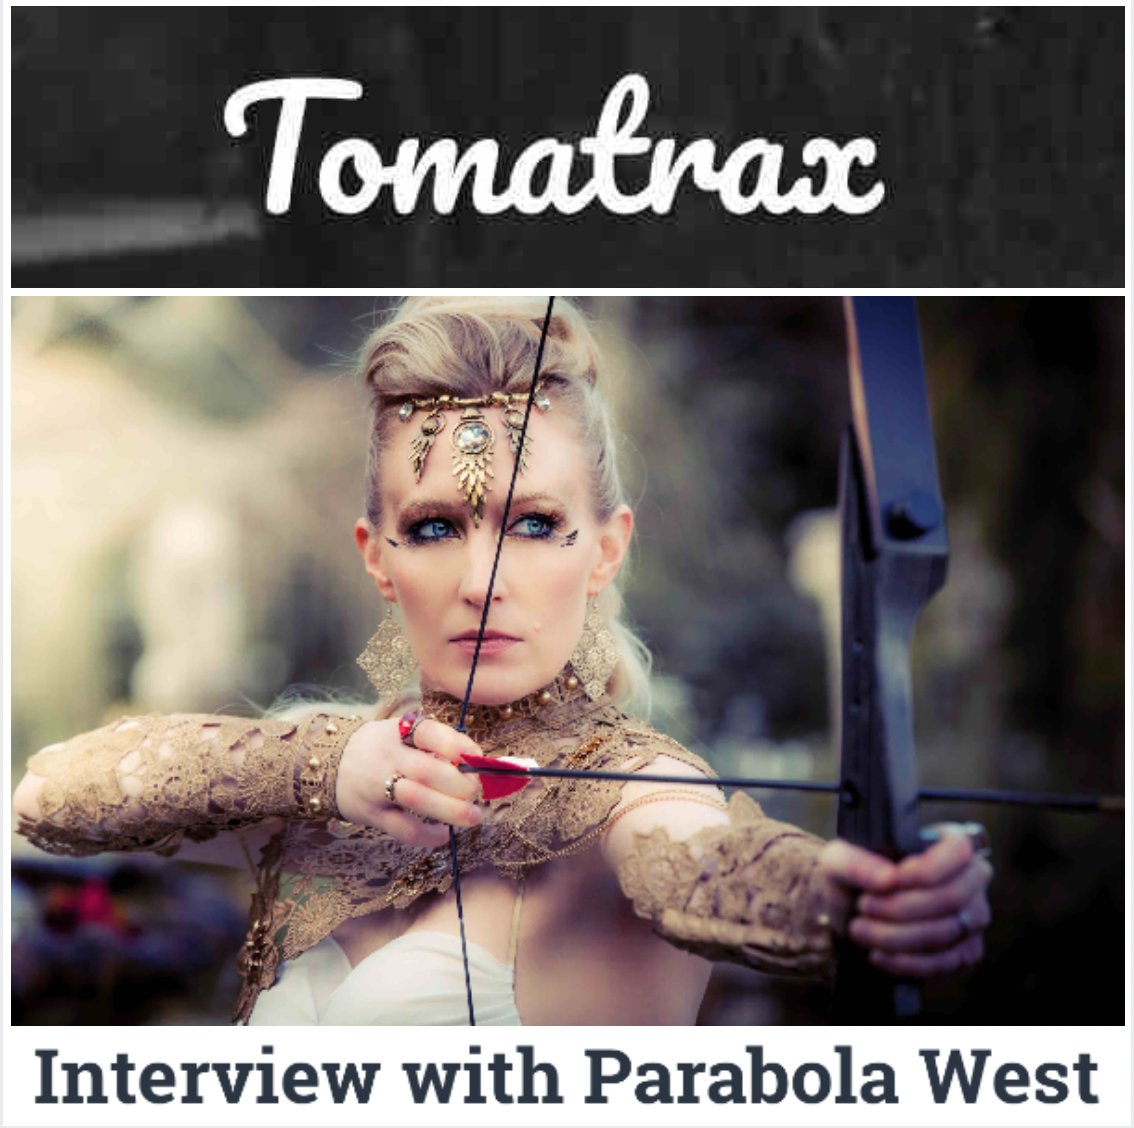 New Zealand-based American-born songstress @ParabolaWest interviews with Richard at Australia's @TomatraxAU blog about her new single 'Calling Your Name', produced by Scott Newth and Andrew Newth, and more ~ goo.gl/fhE438 @System_Corp